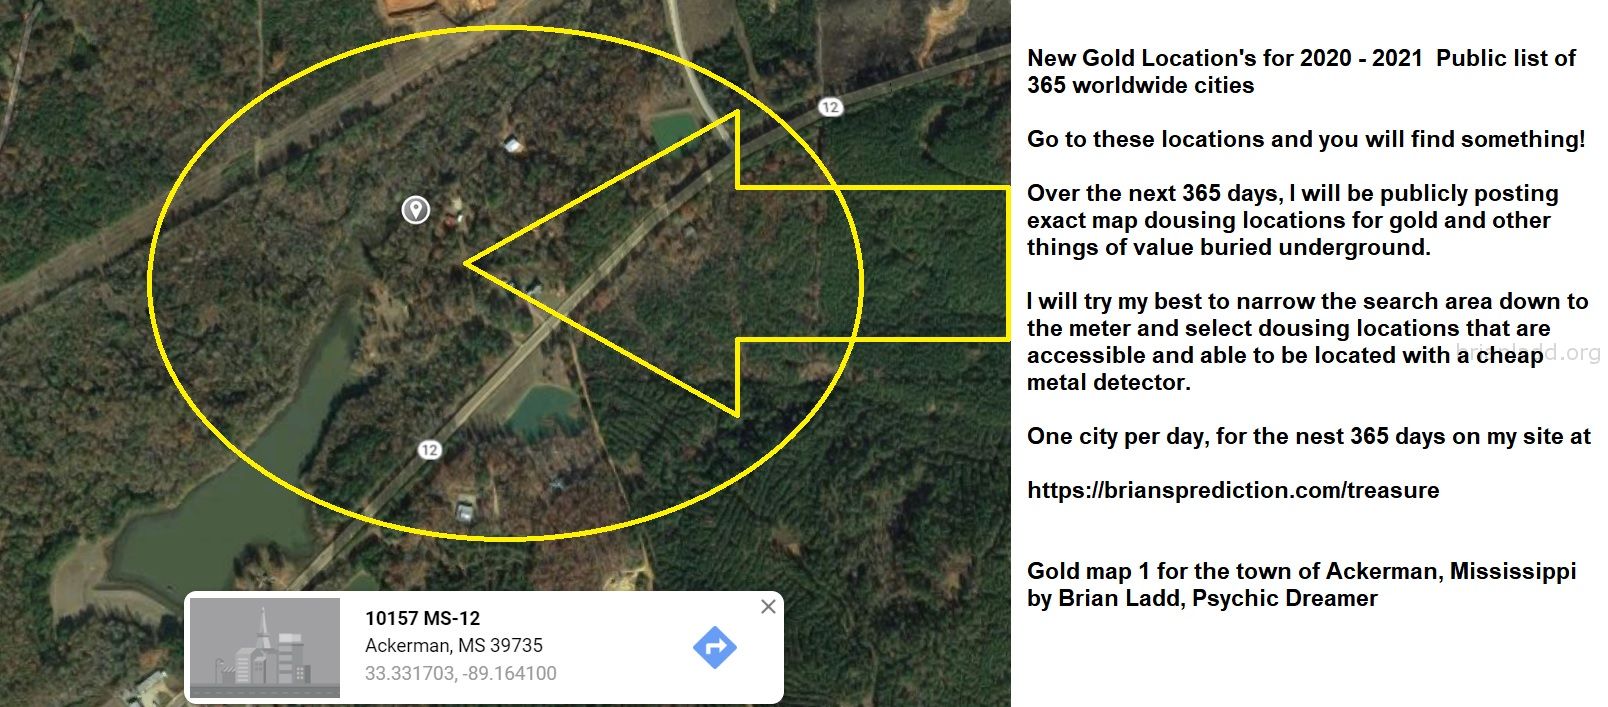 1 Gold Map For The Town Of Ackerman Mississippi Psychic Dreamer - Ke??€™wuan Gray Was in Independence Park - Not Sur...
Ke??€™wuan Gray Was in Independence Park - Not Sure What These Are - This Is a Lucid Dream for a Missing Teen - Here Is That Location - He Will Be Found Soon. Case at   https://briansprediction.com/kewuan-gray
